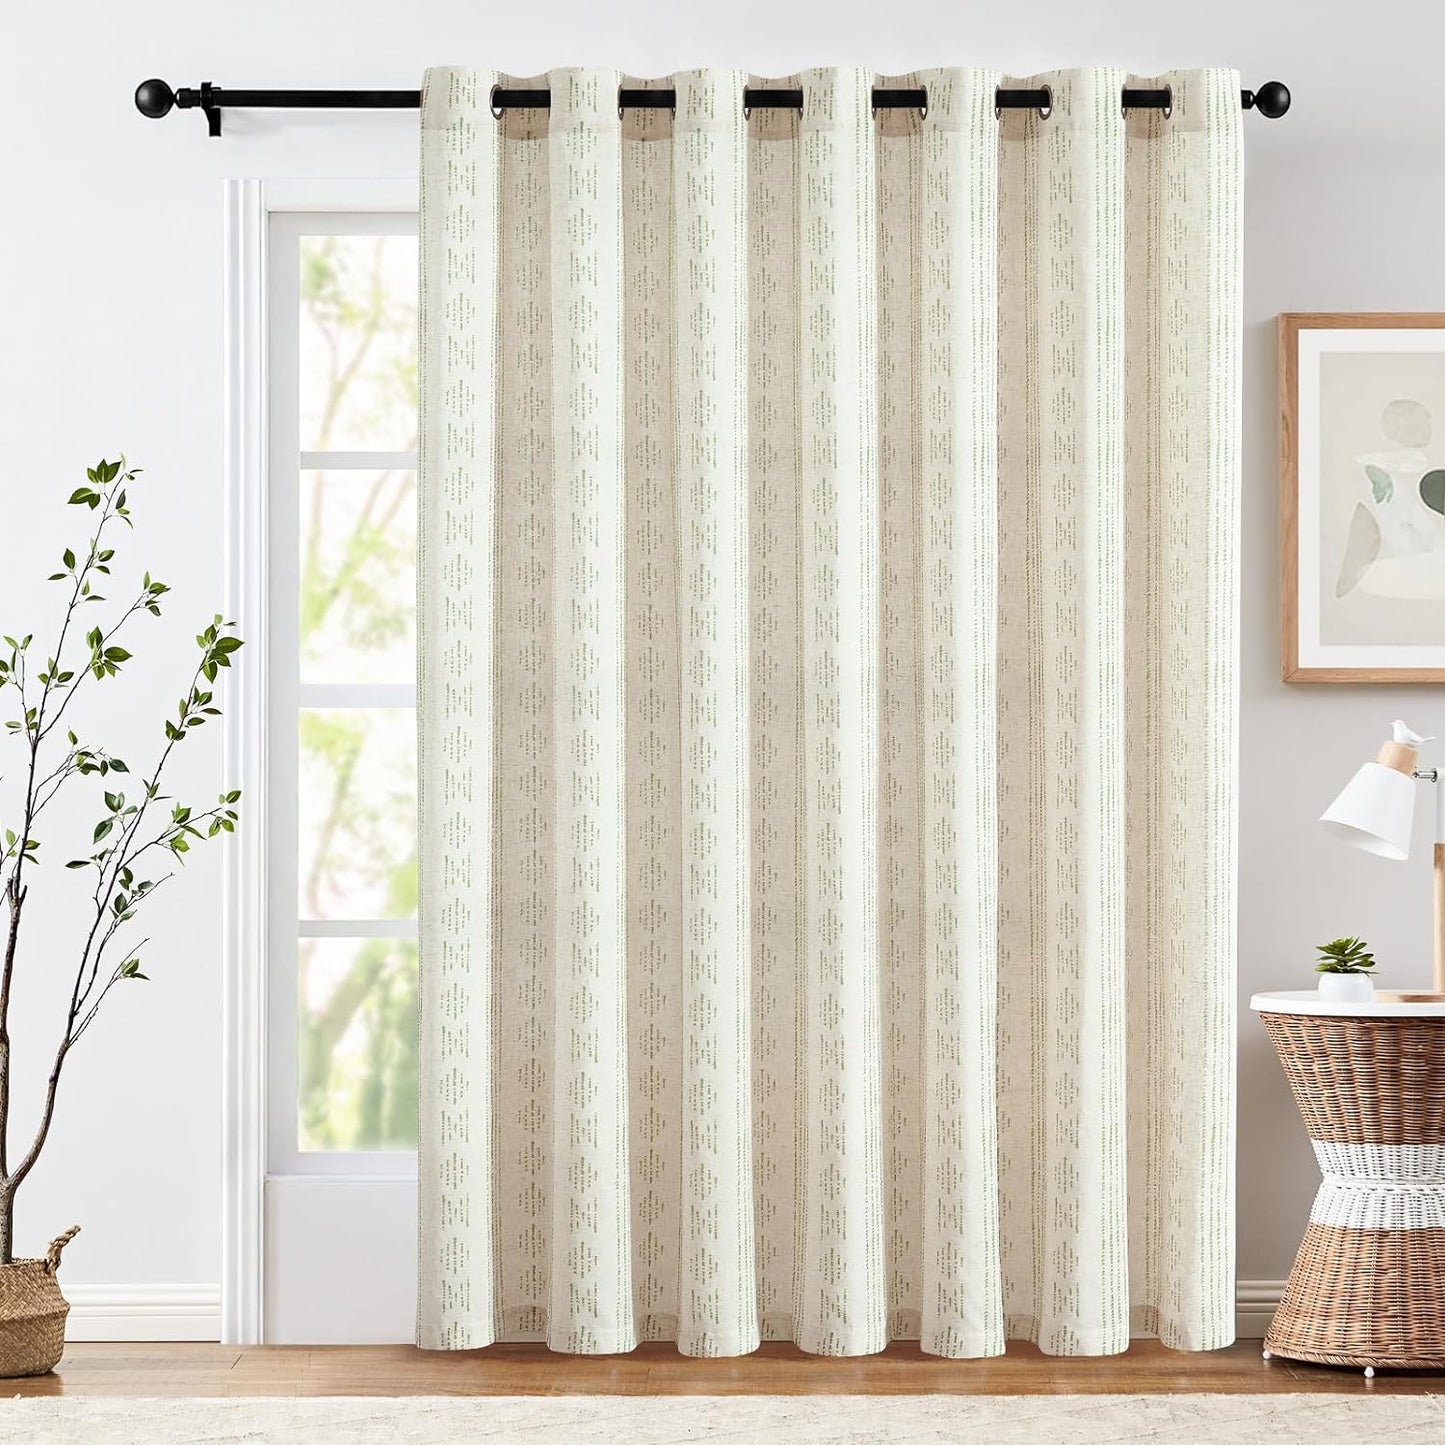 Jinchan Boho Curtains Linen Sliding Patio Door Curtains 84 Inches Long 1 Panel Divider Drapes Extra Wide Black Farmhouse Curtains for Living Room Geometric Striped Light Filtering Grommet Curtains  CKNY HOME FASHION Boho| Sage On Flax W100 X L84 